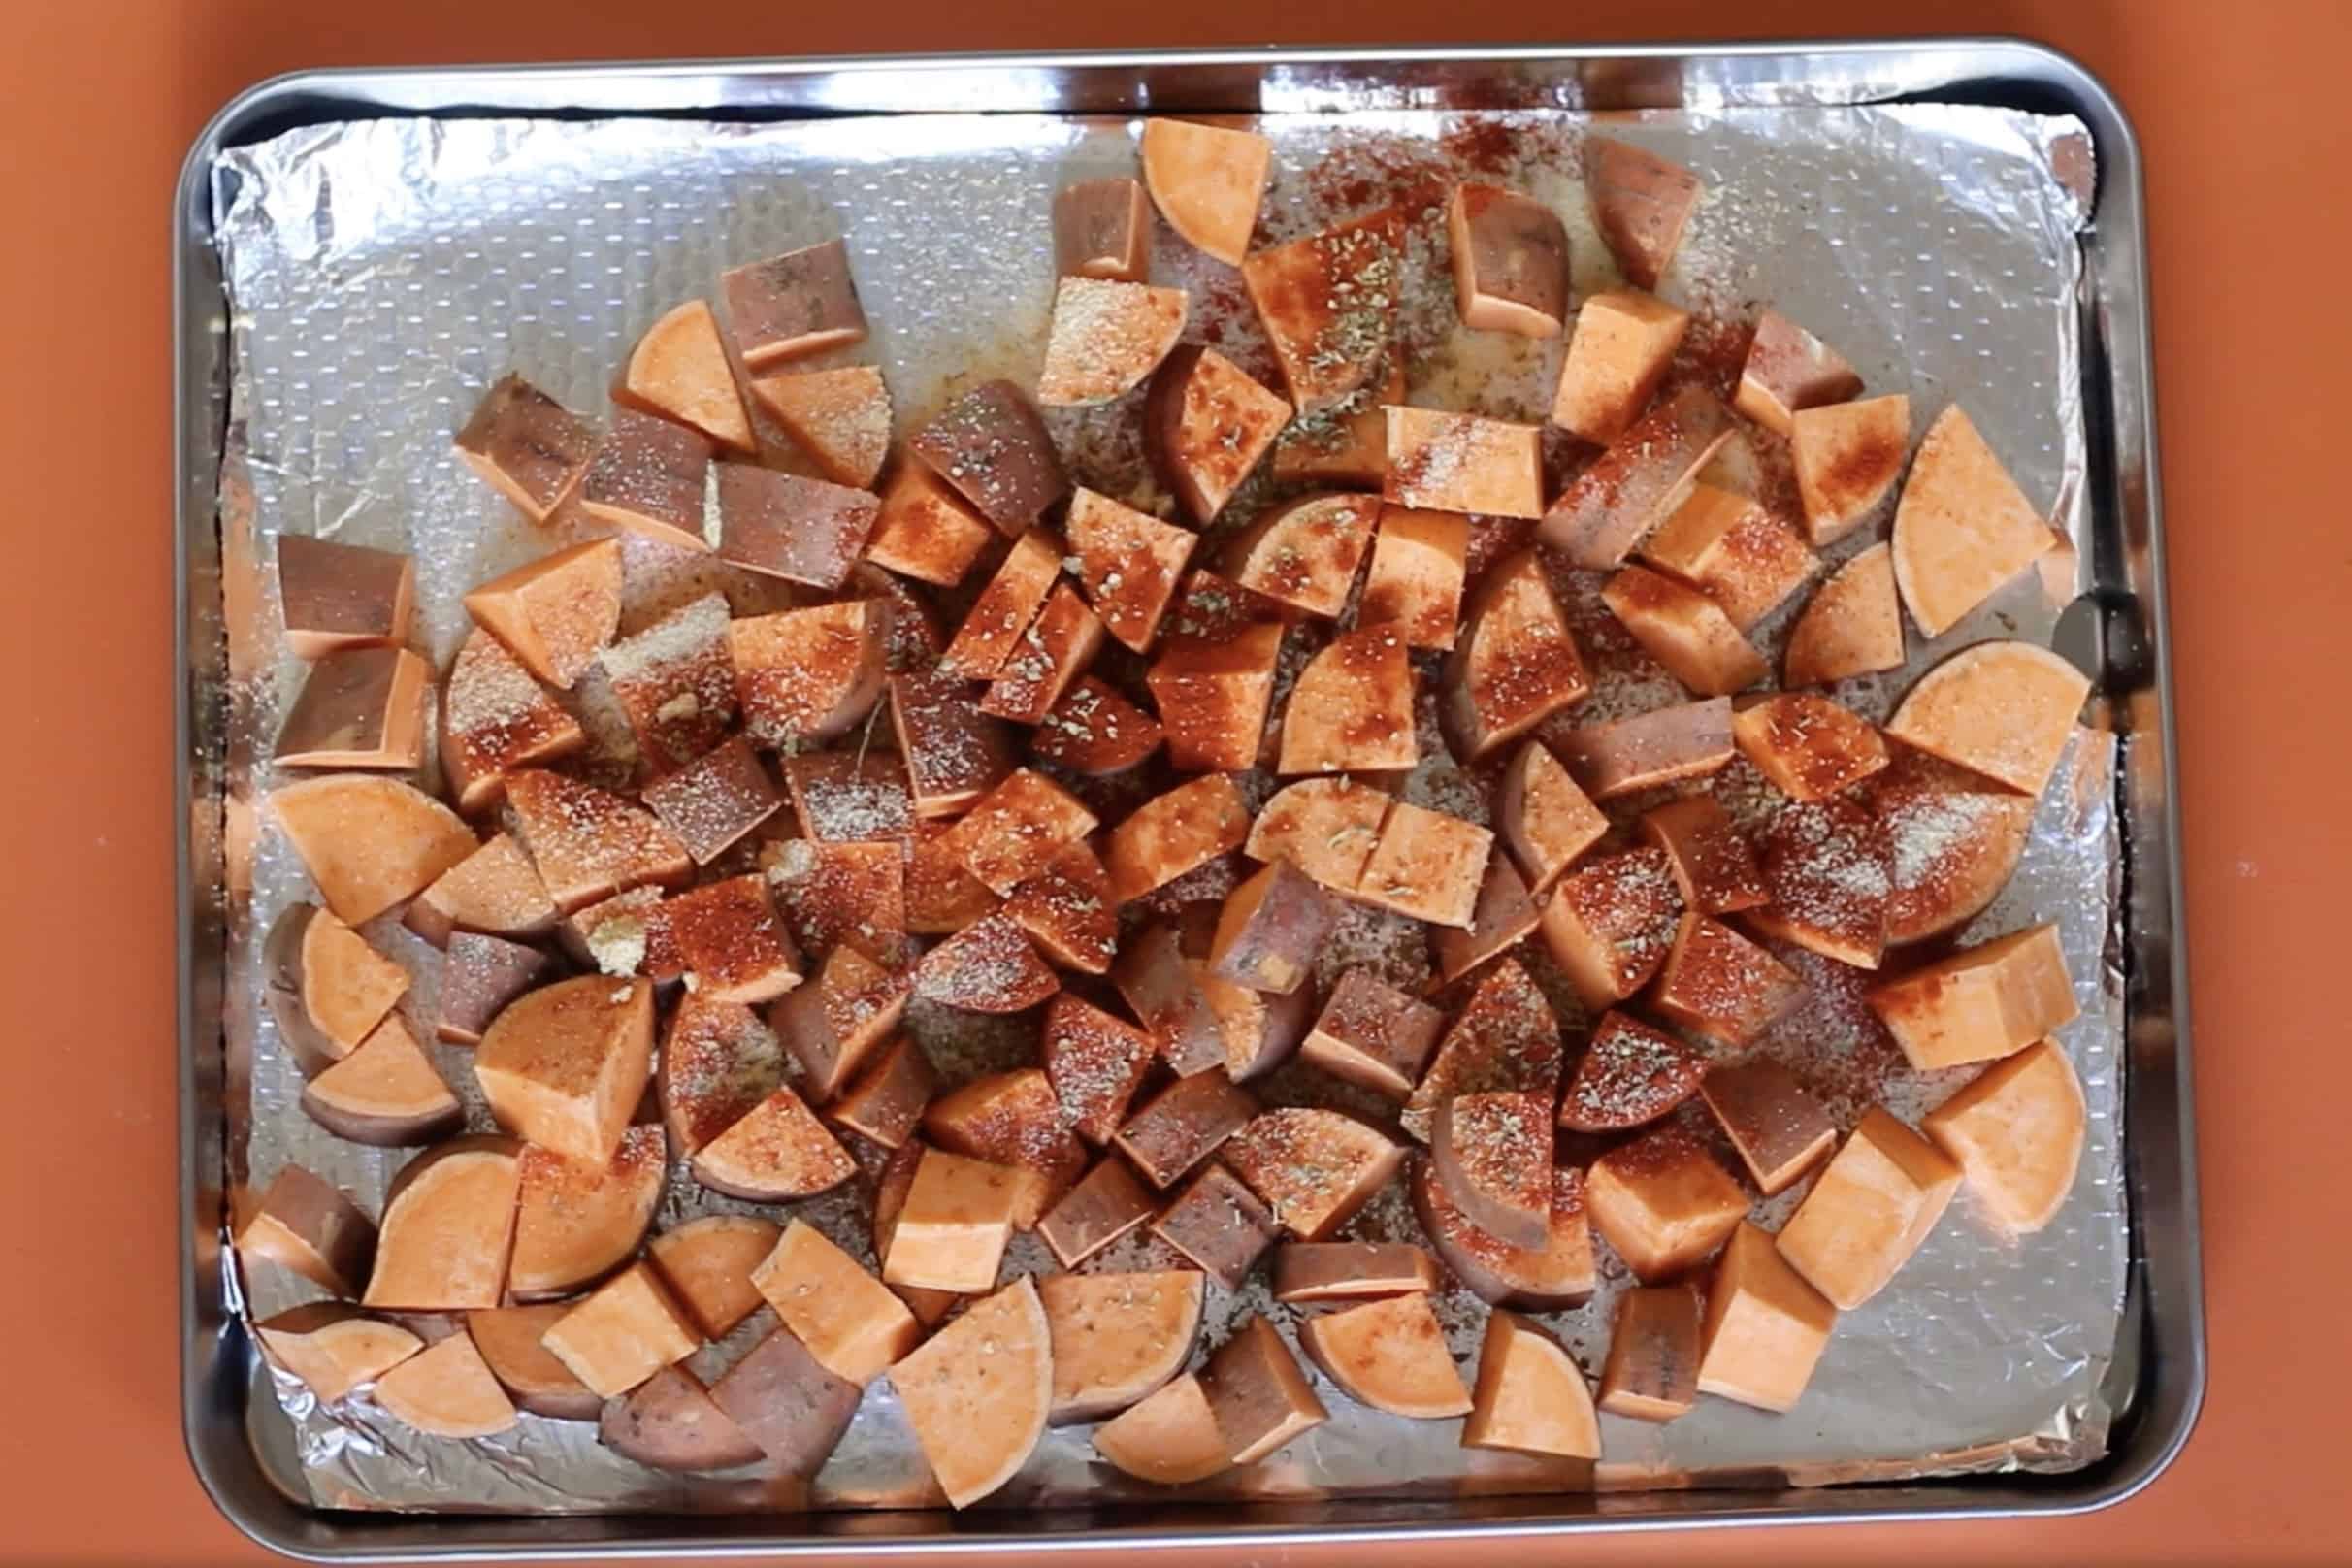 Sweet potatoes cubed on a baking tray